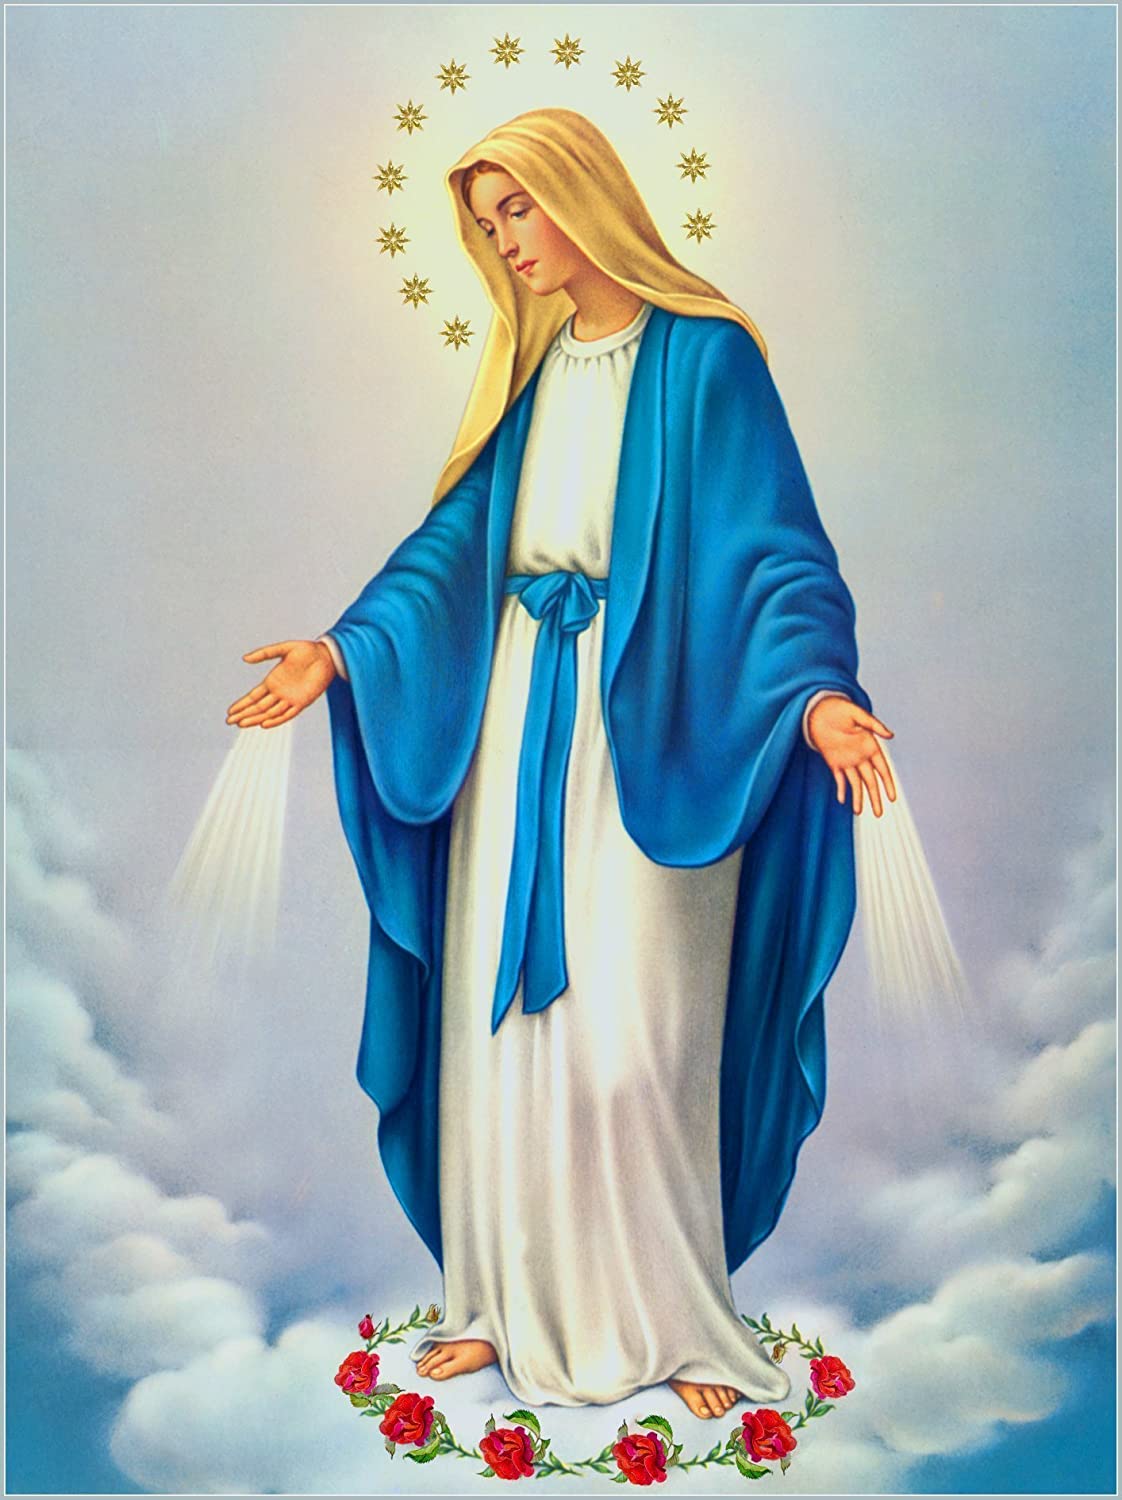 Immaculate Conception POSTER A2 Picture Virgin Mary print image Our Lady Blessed Mother Holy Mary painting Catholic posters prints, Handmade Products